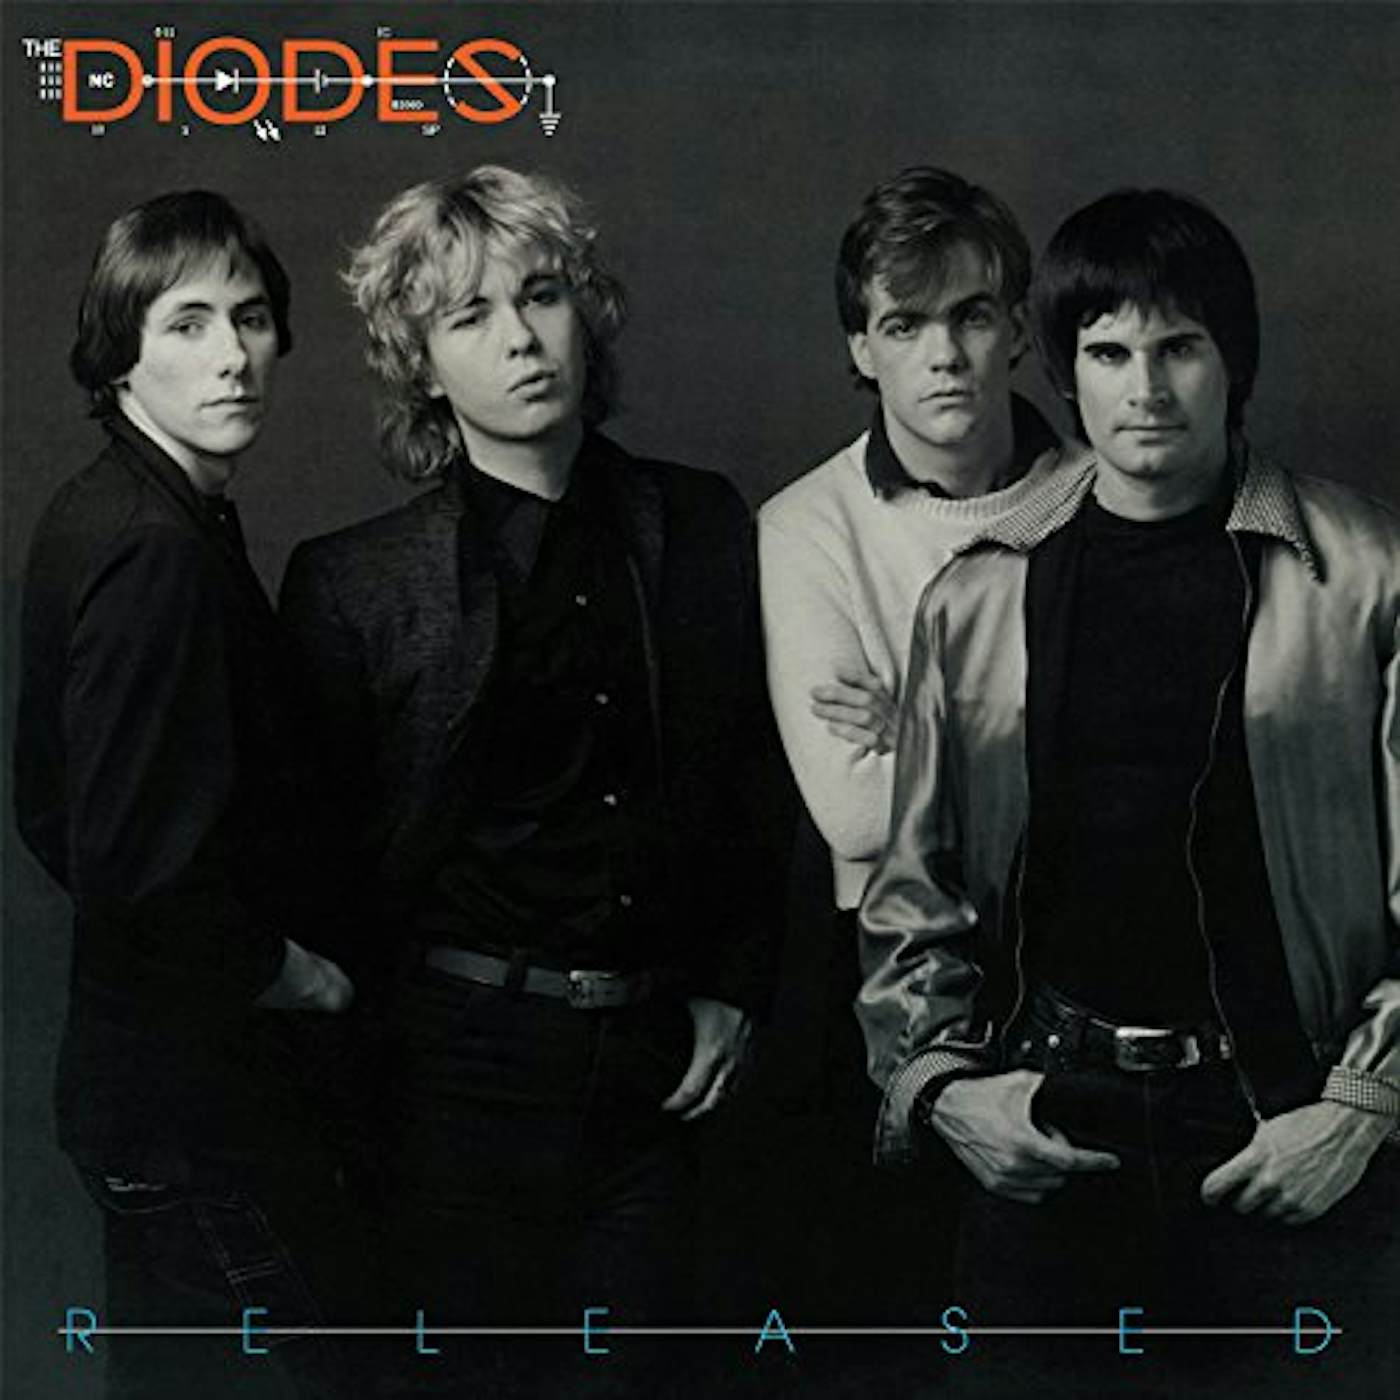 The Diodes Released Vinyl Record